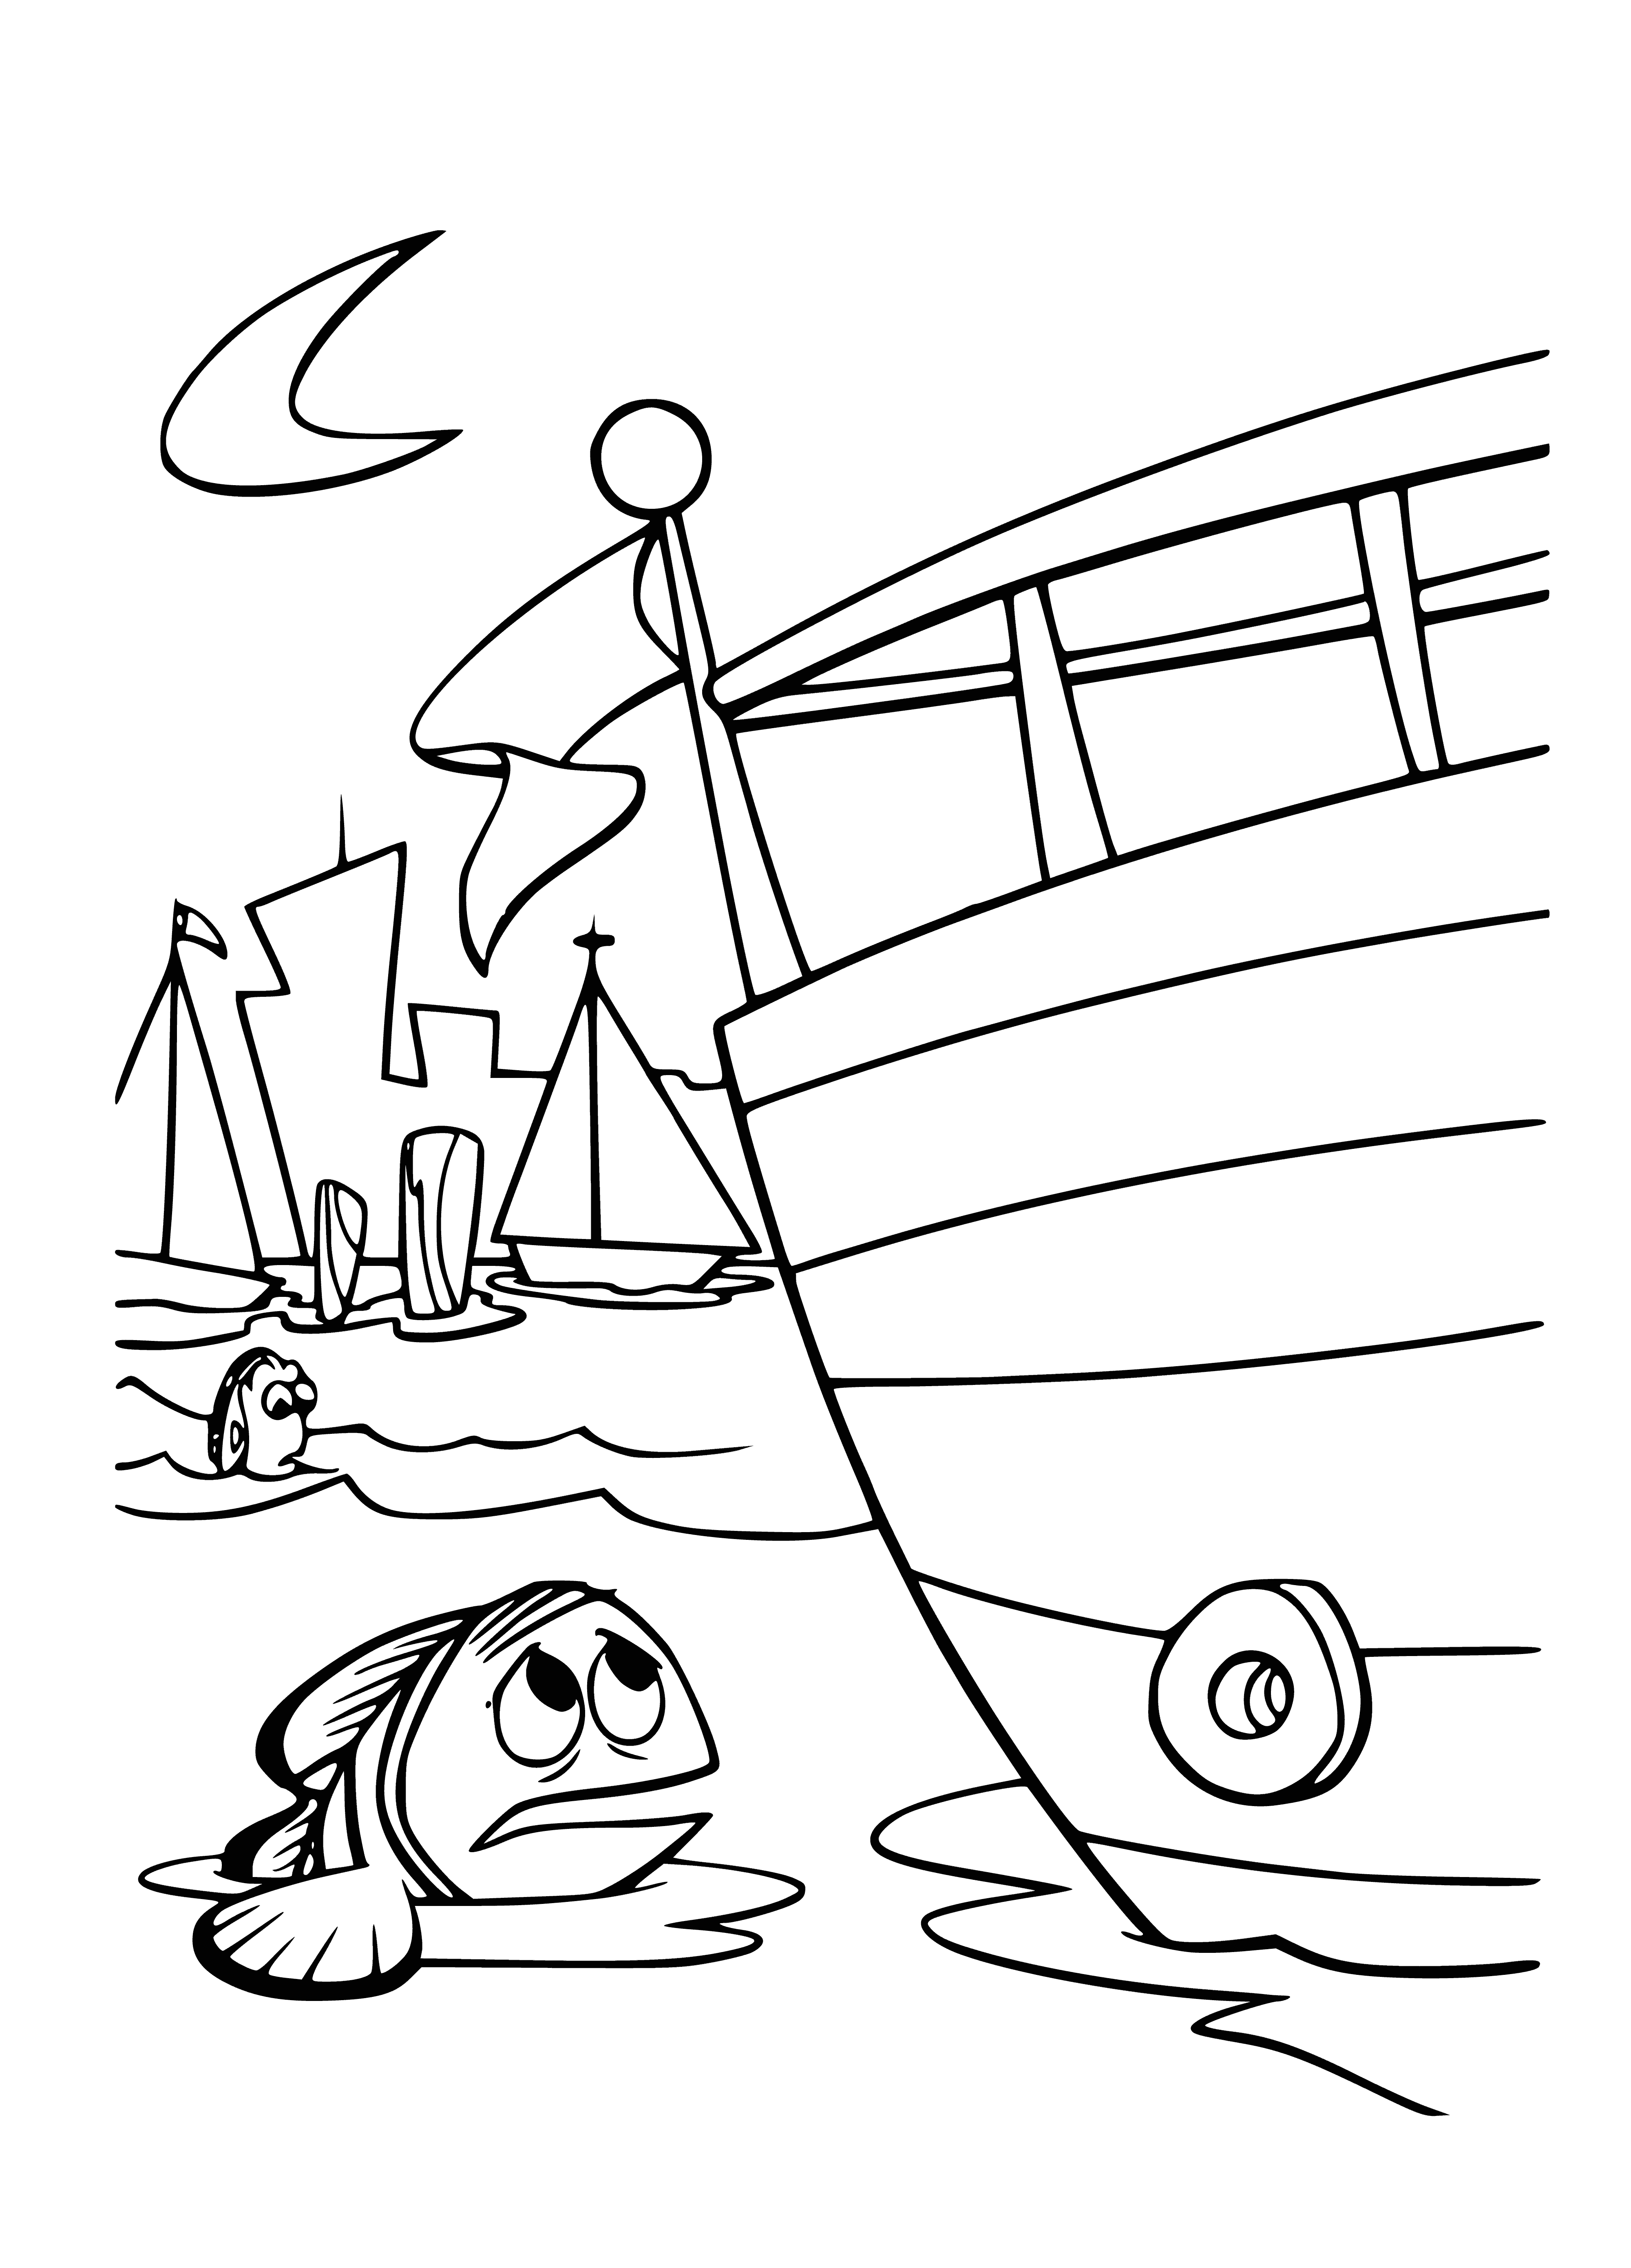 Too many boats coloring page